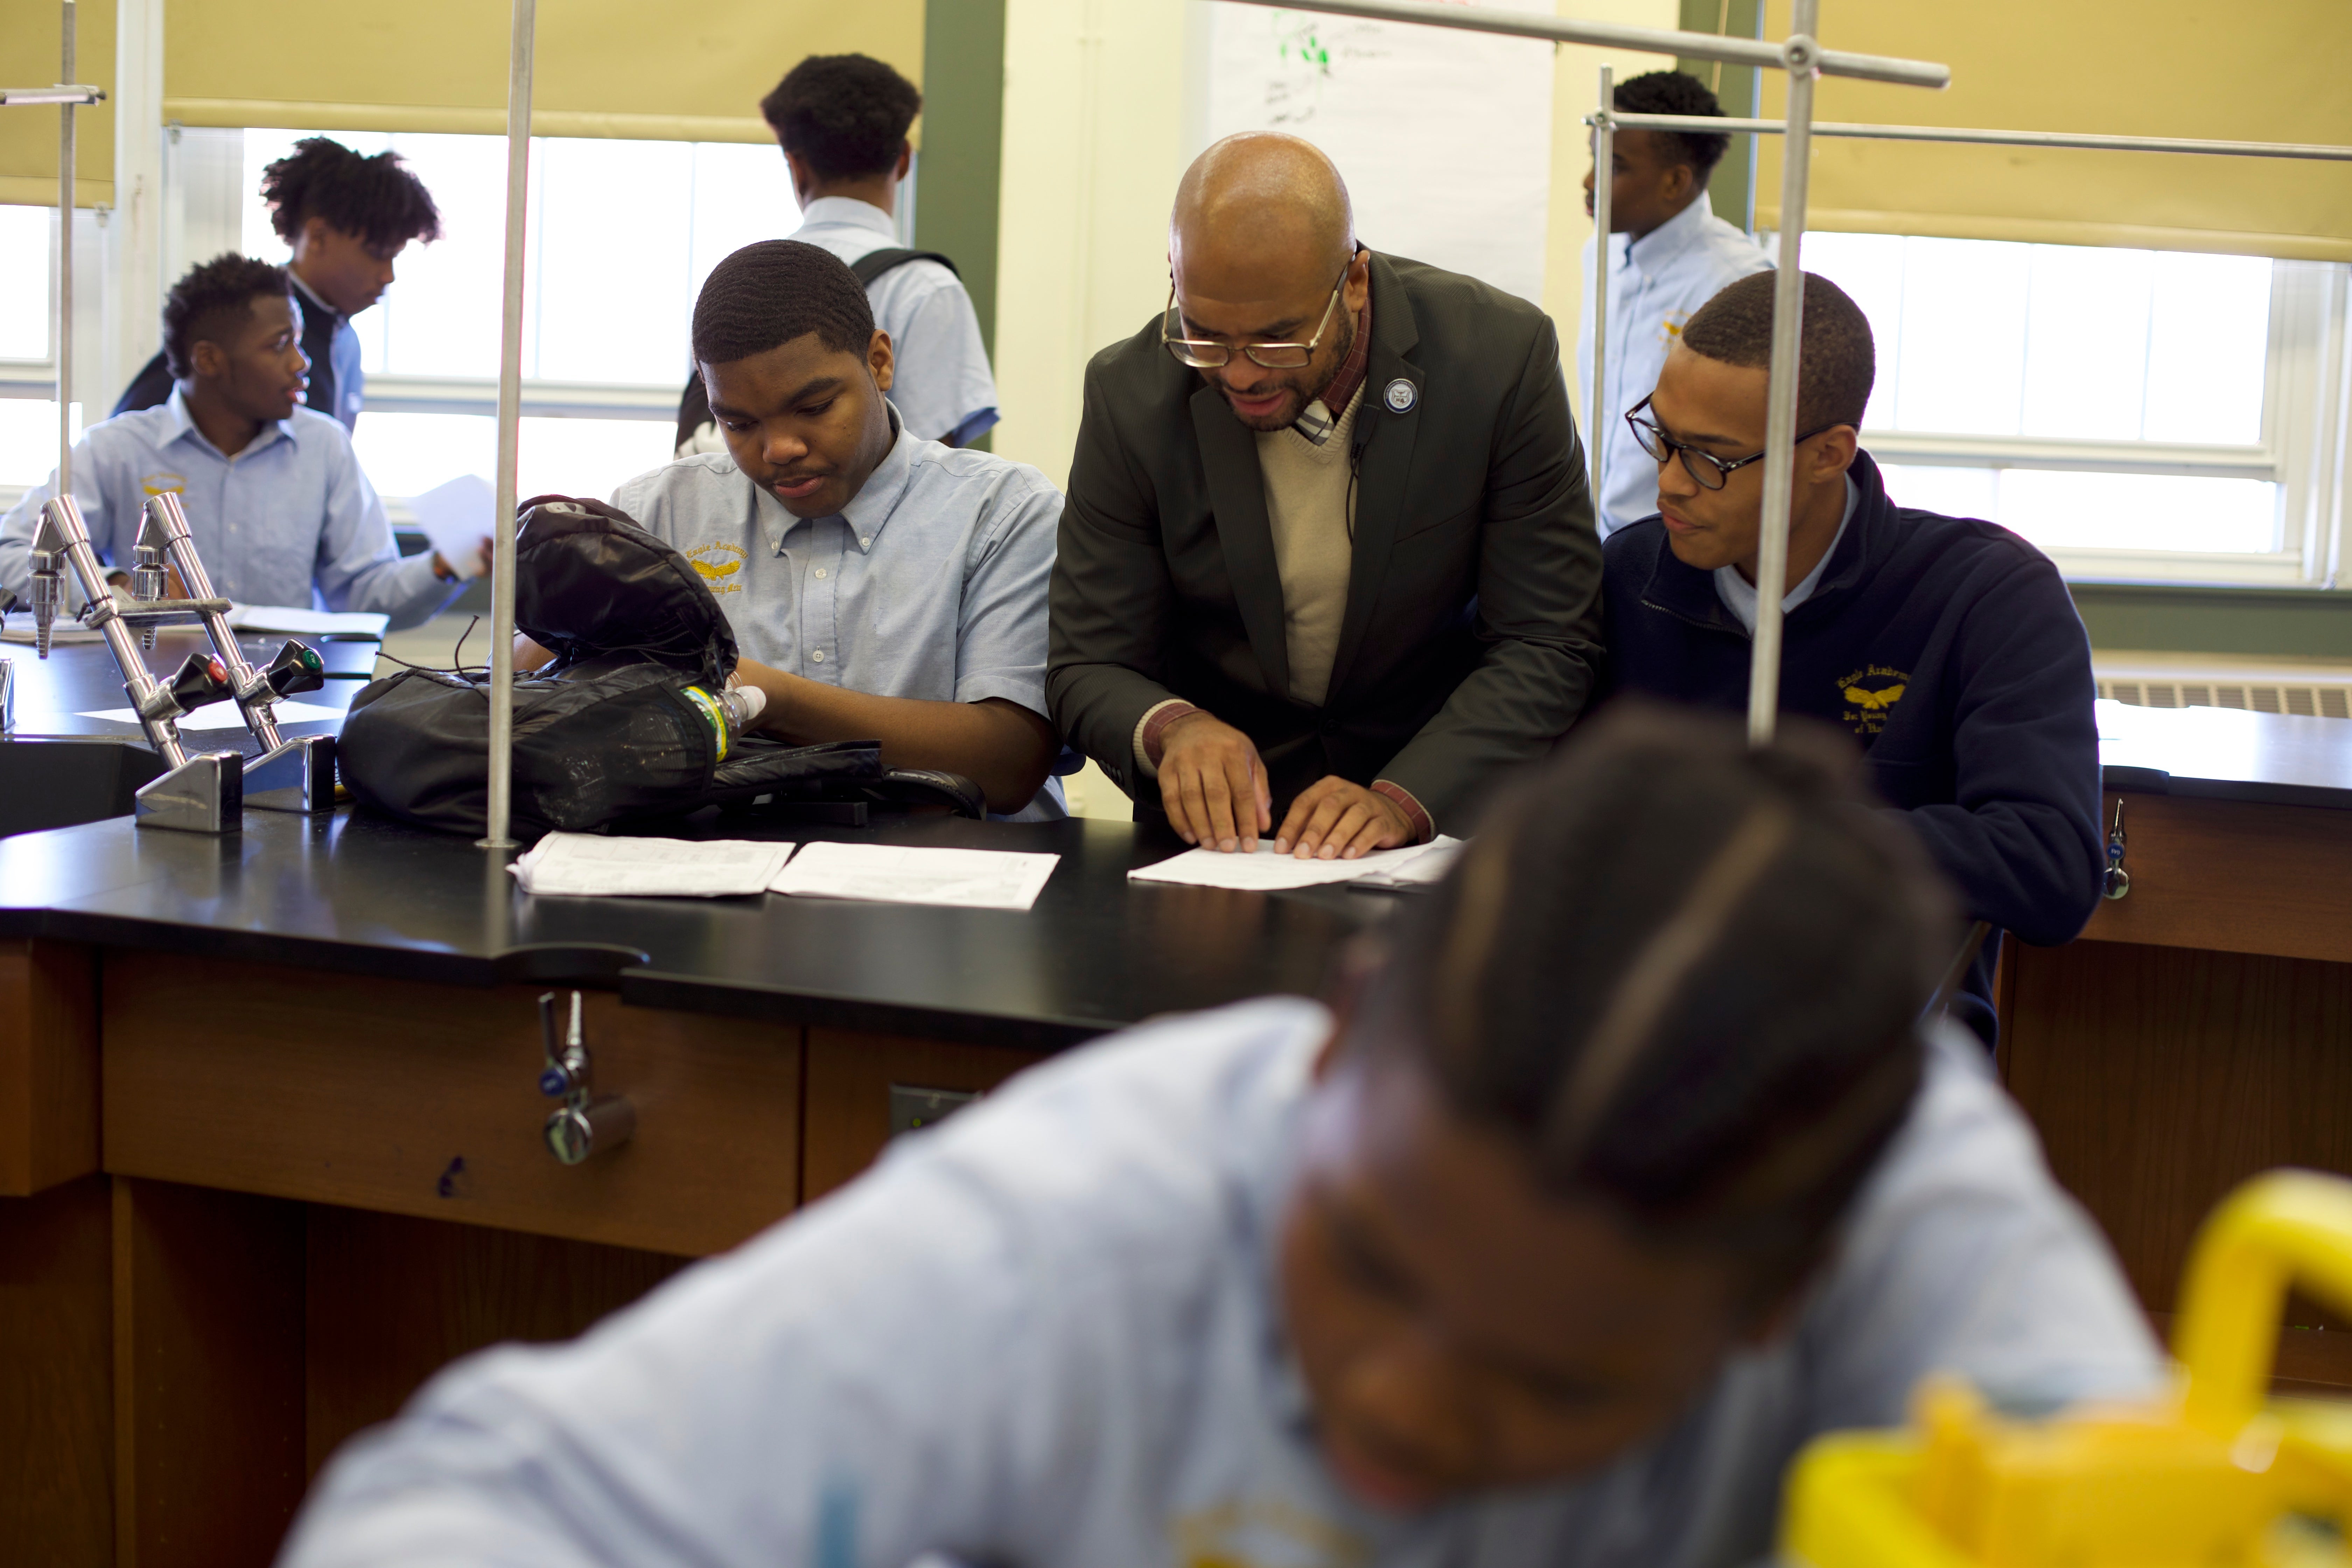 A principal reads an assignment with students during a lab class.